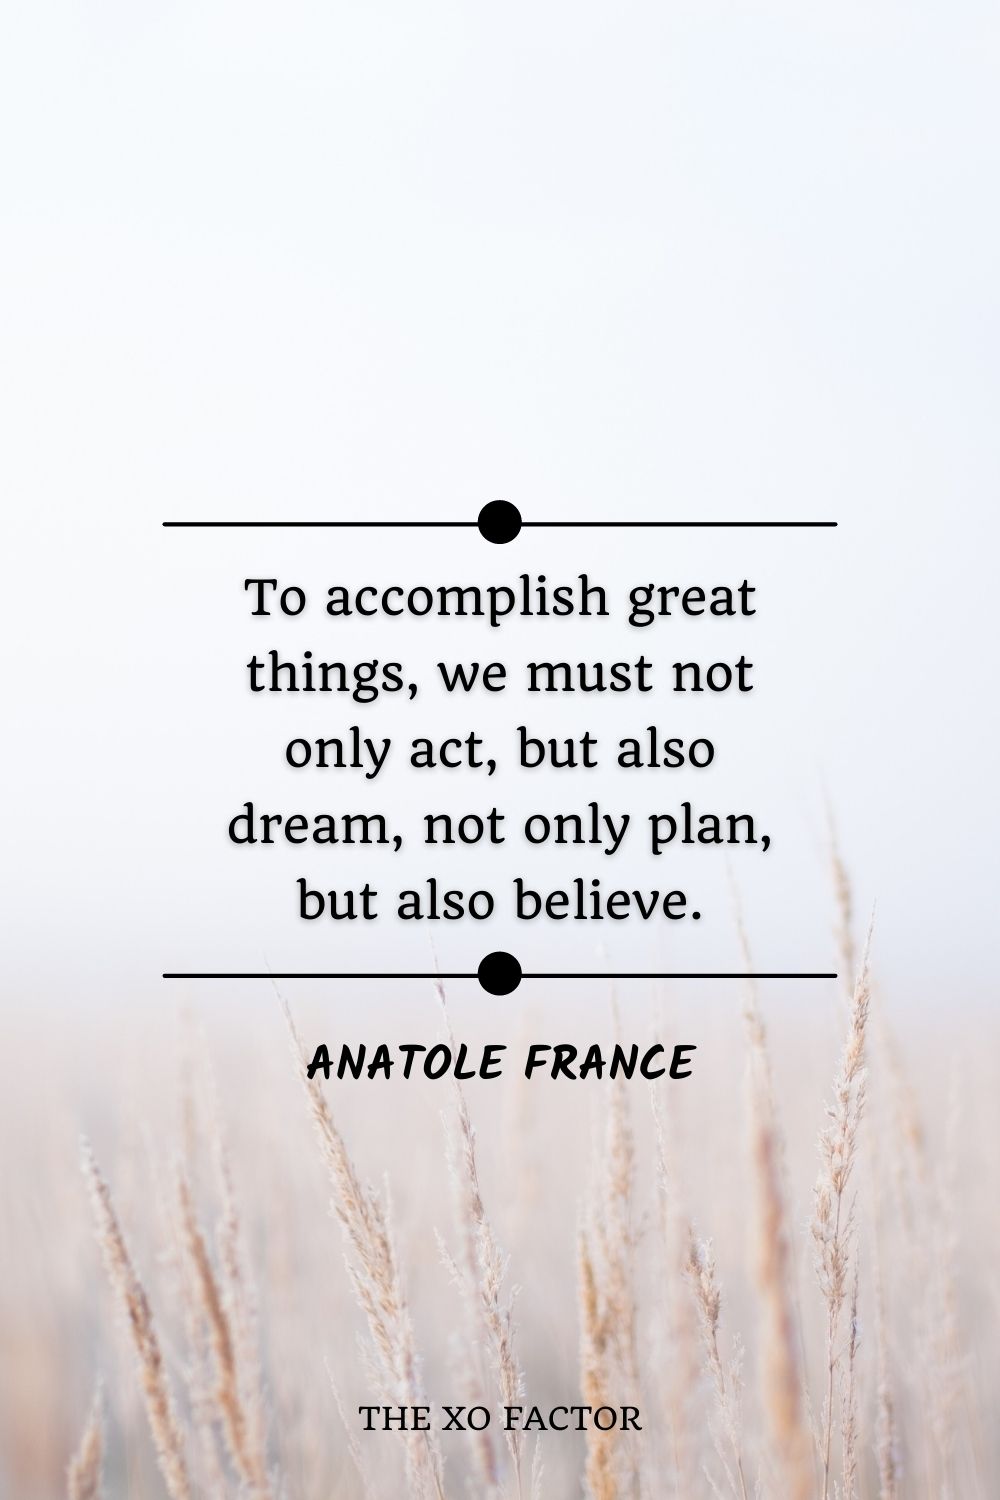 To accomplish great things, we must not only act, but also dream, not only plan, but also believe. Anatole France